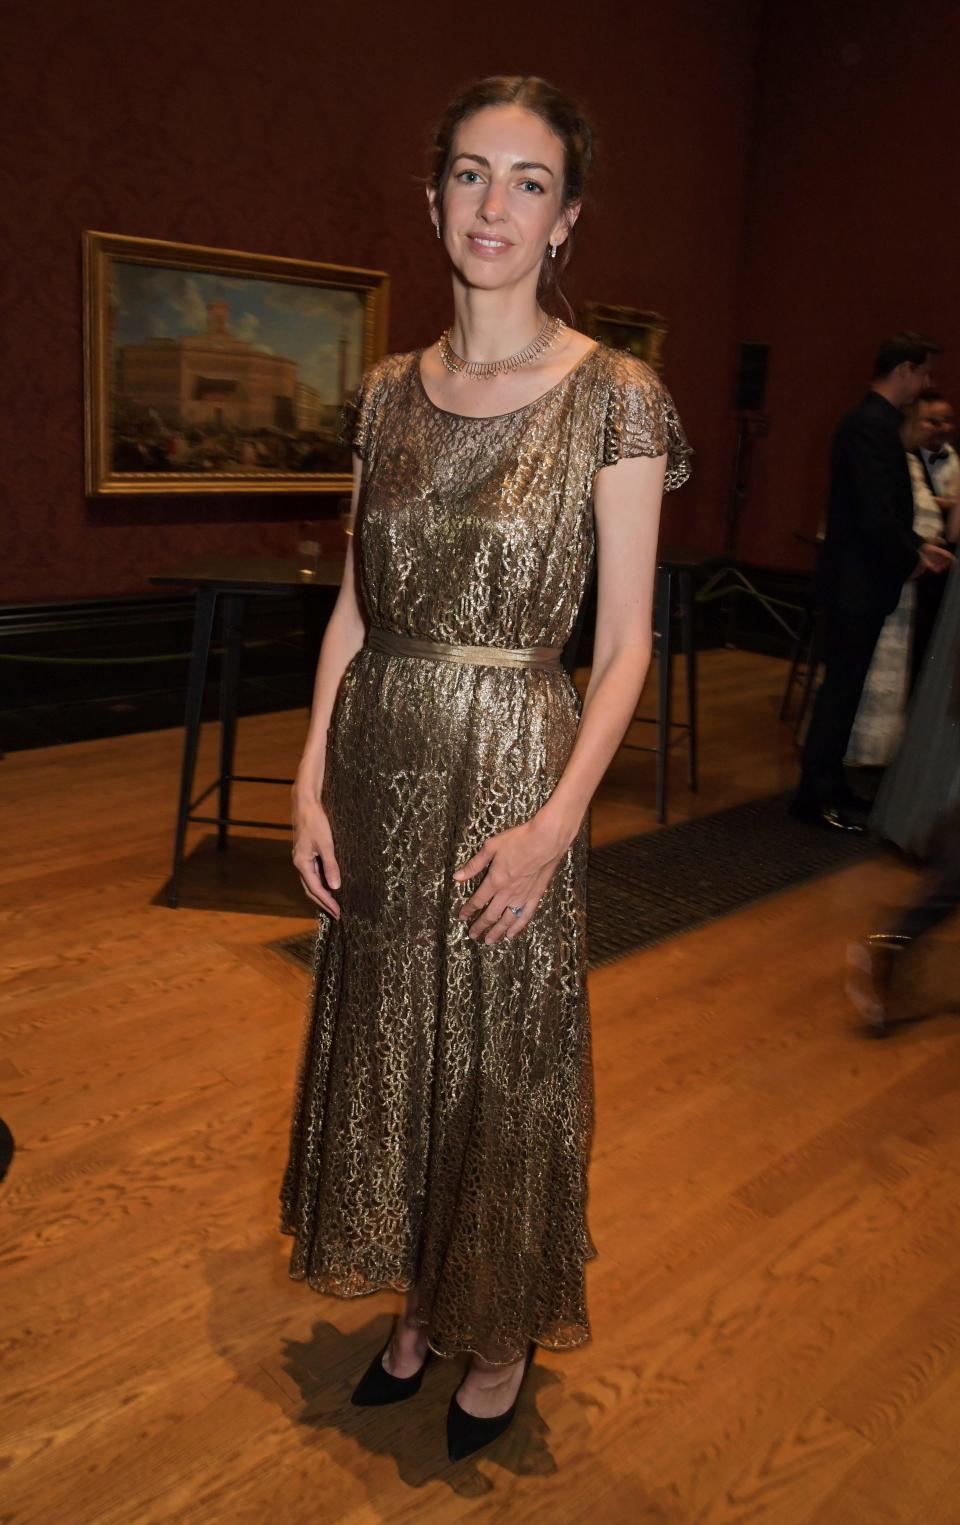 Rose Hanbury attends a gala in support of the National Gallery in 2022.